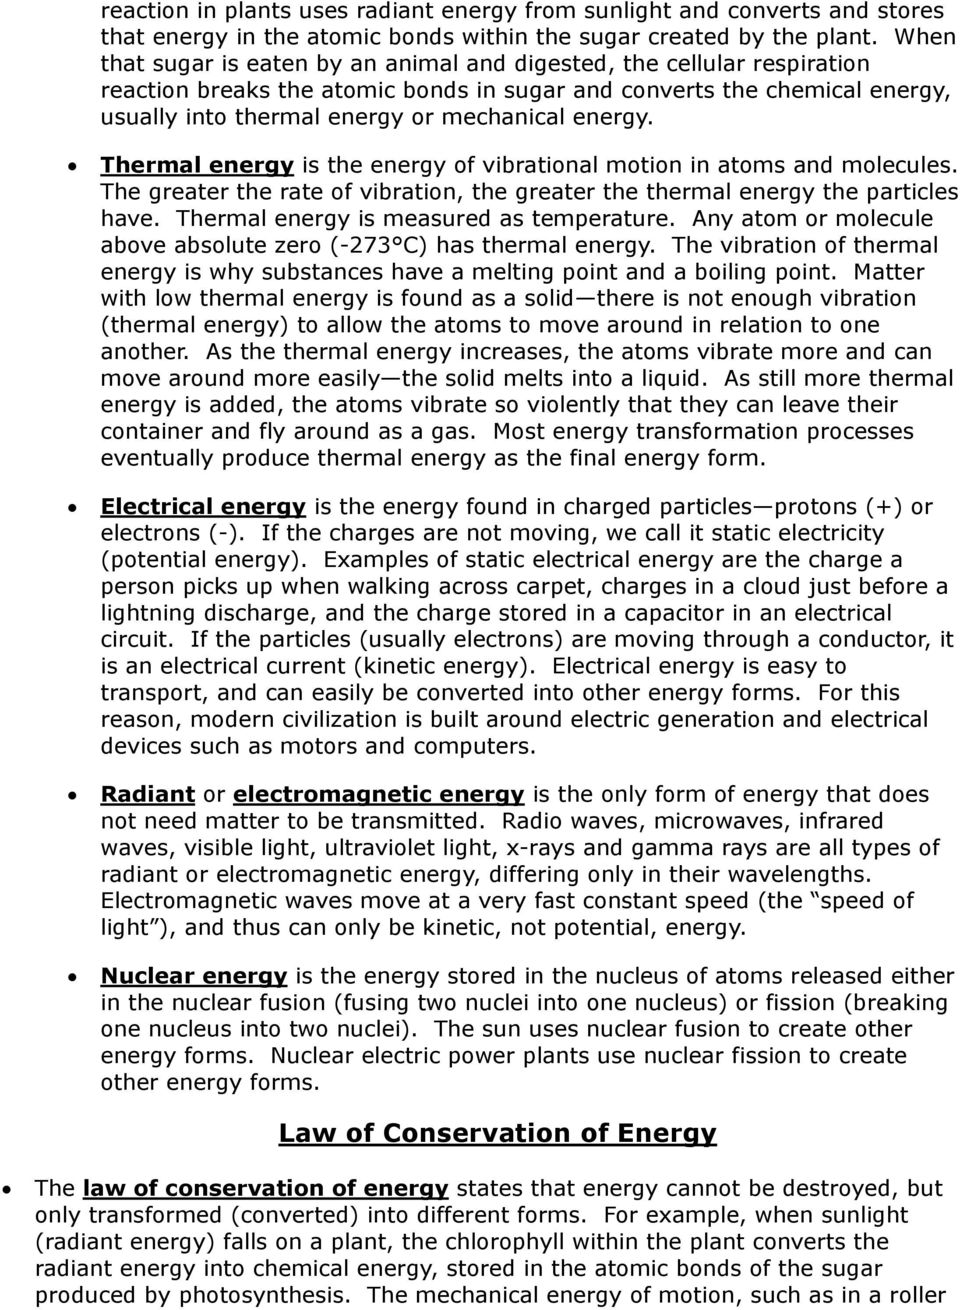 Thermal energy is the energy of vibrational motion in atoms and molecules. The greater the rate of vibration, the greater the thermal energy the particles have.